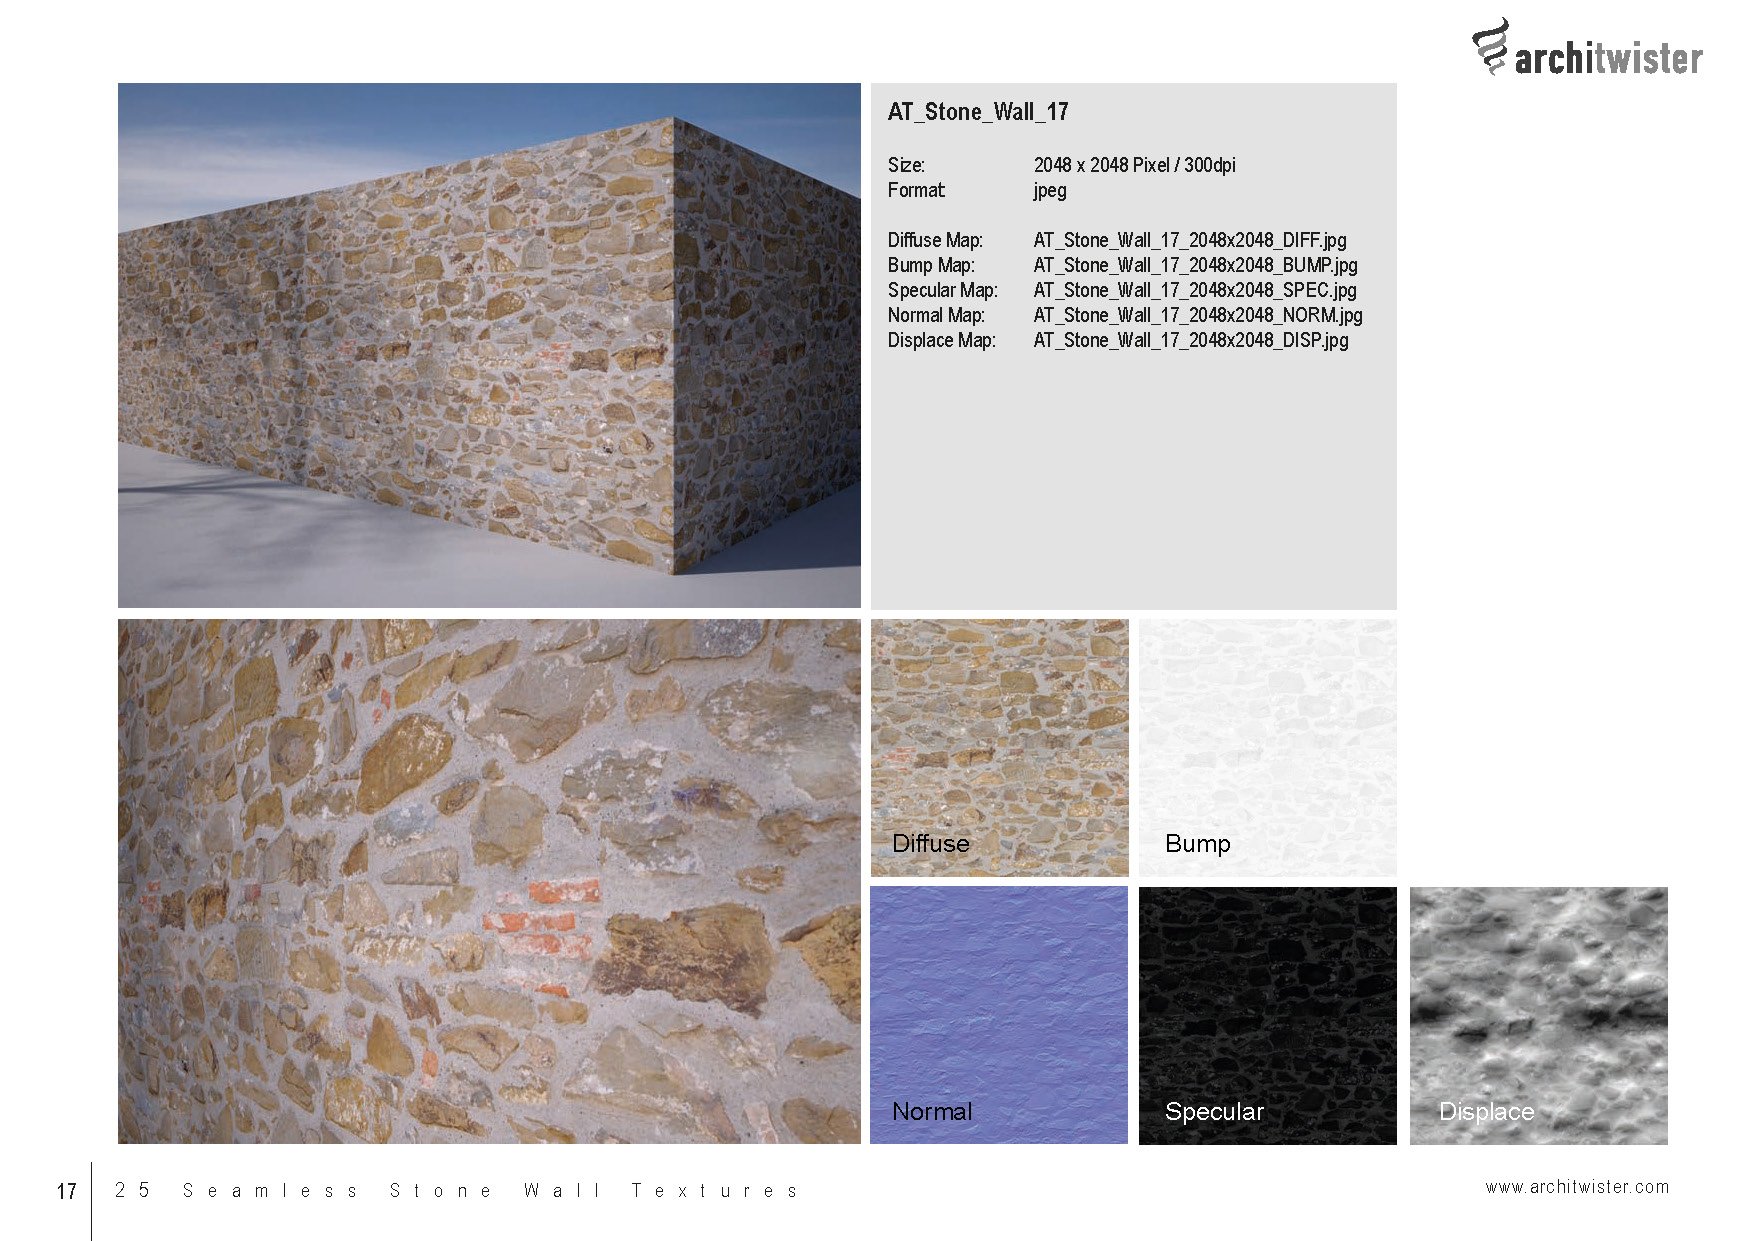 at stone wall textures catalog 01 seite 18 377